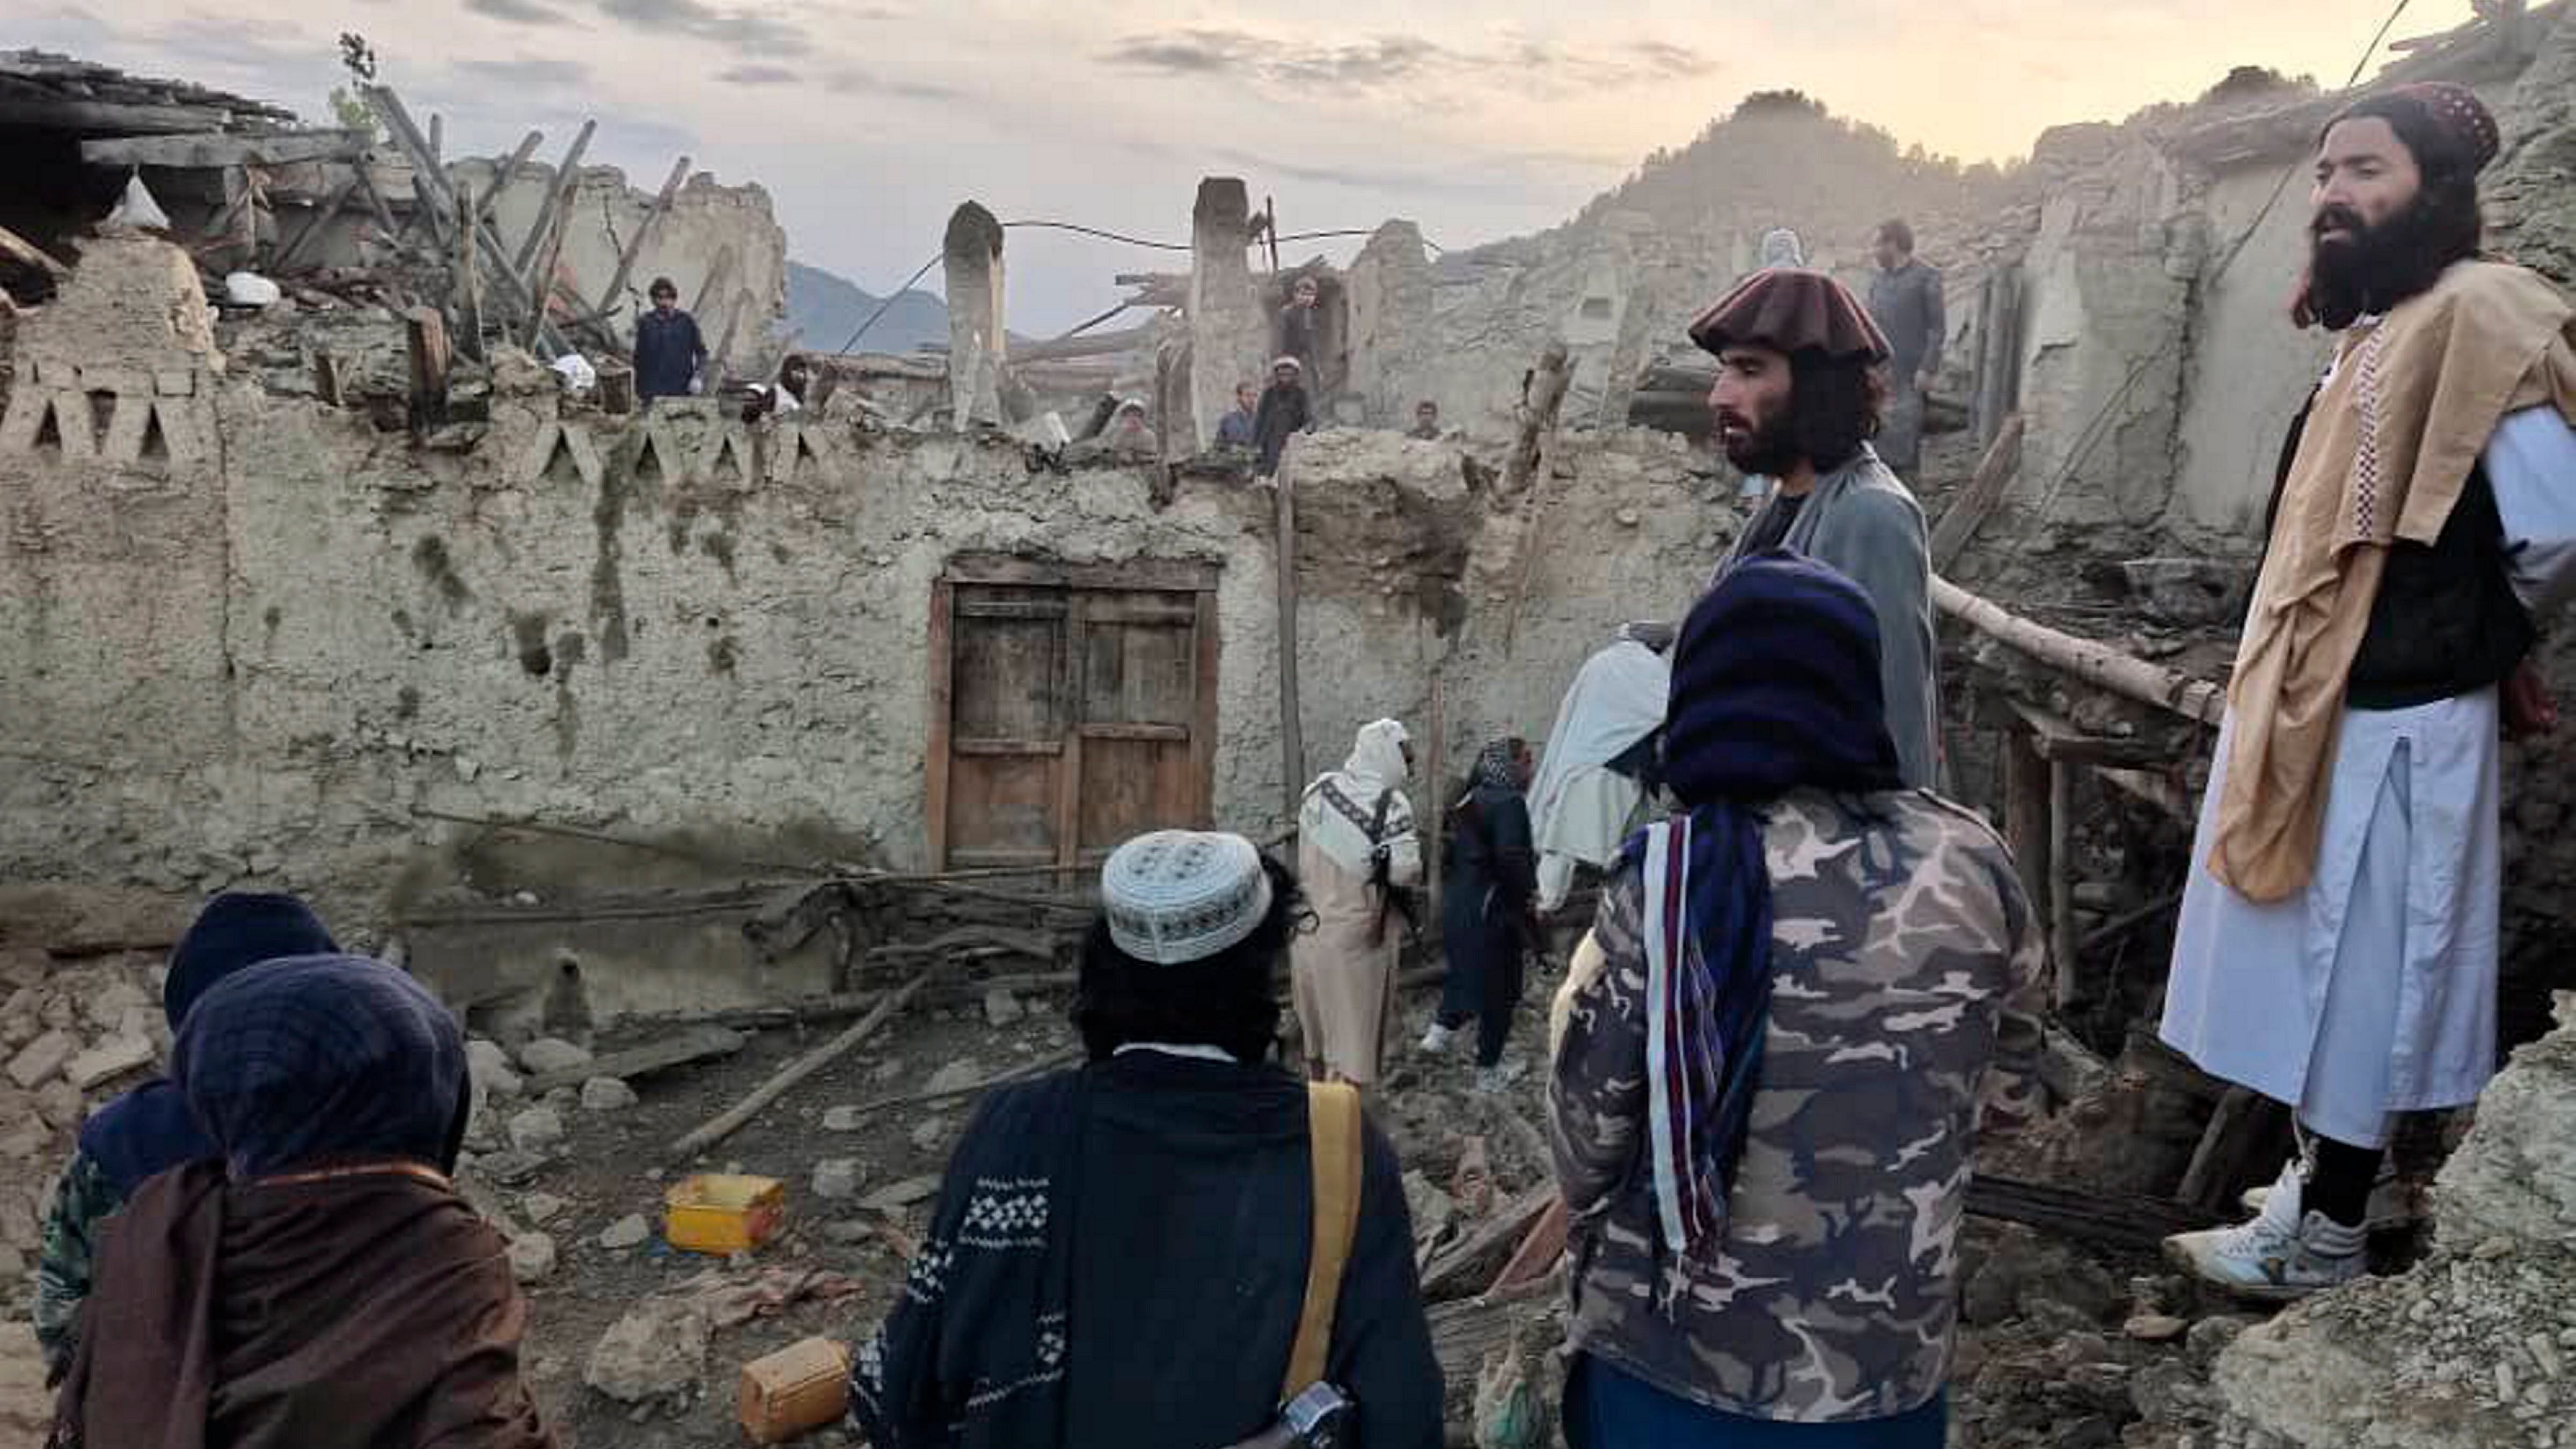 Afghans look at destruction caused by an earthquake in the province of Paktika. Credit: AP Photo